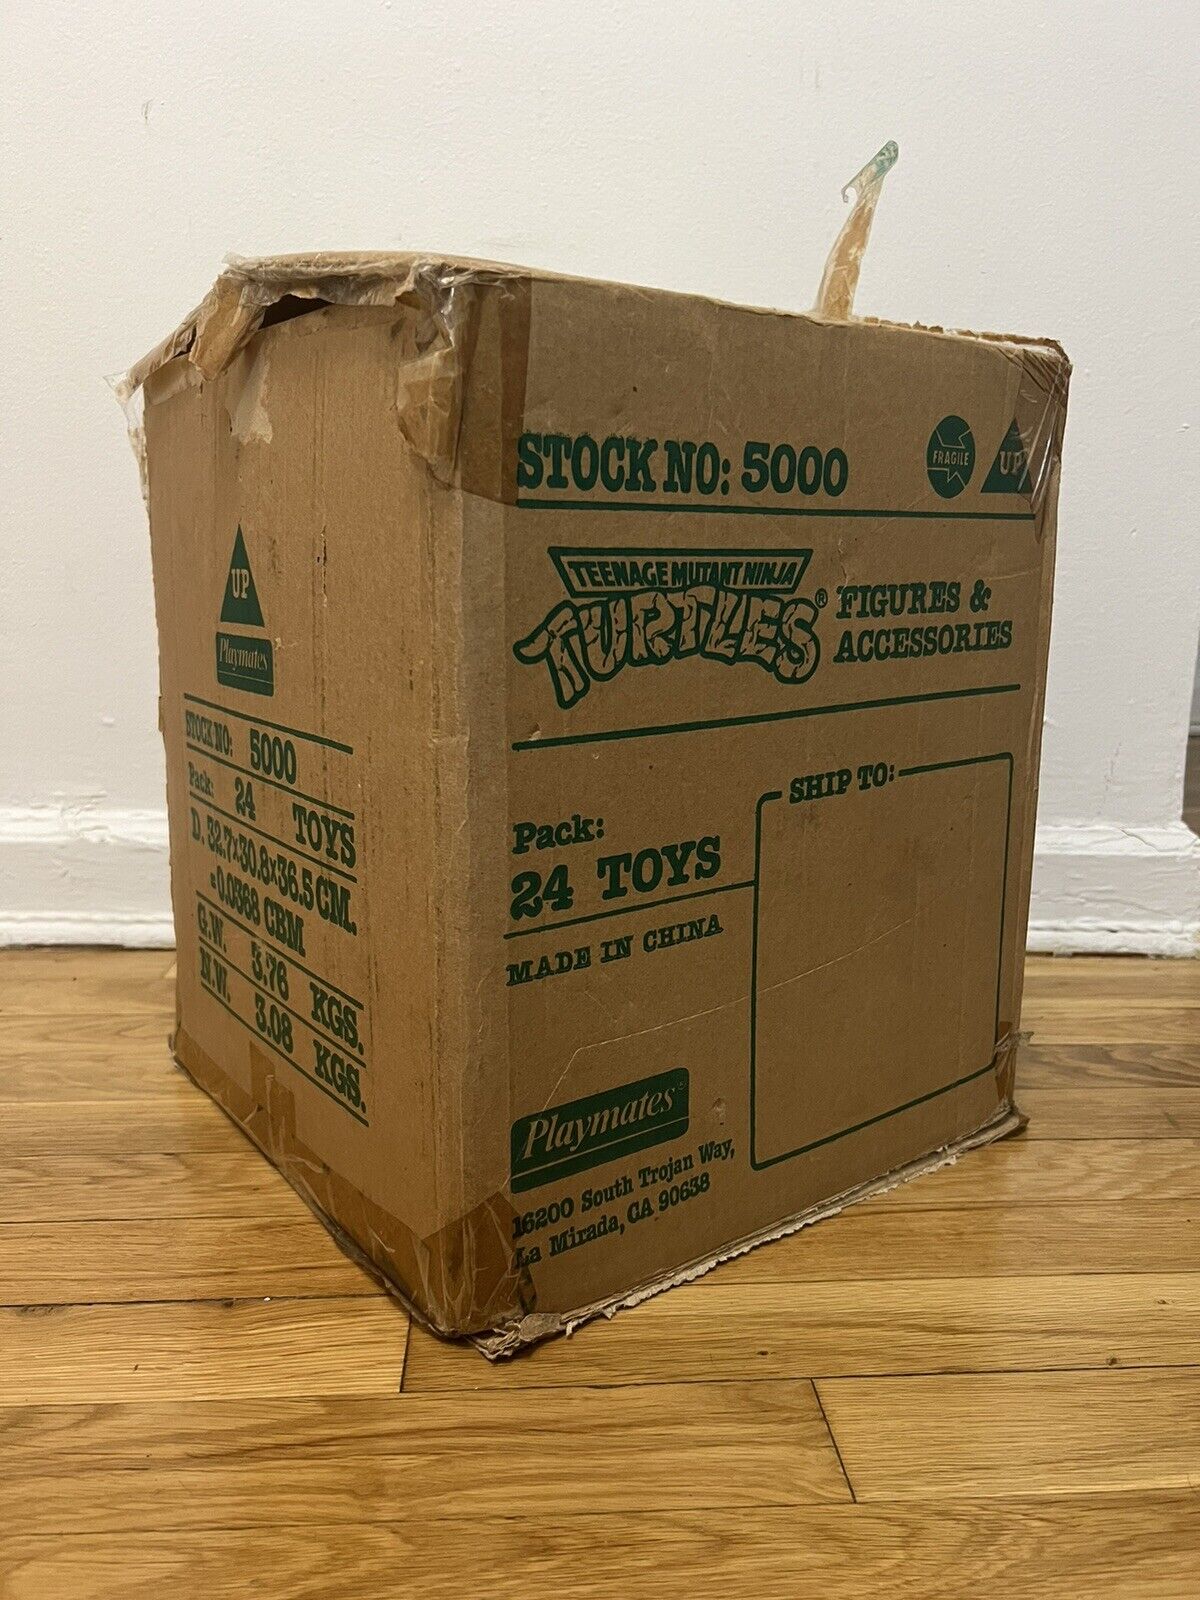 Vintage TMNT Ninja Turtles Figure shipping crate outer box Playmates No. 5000